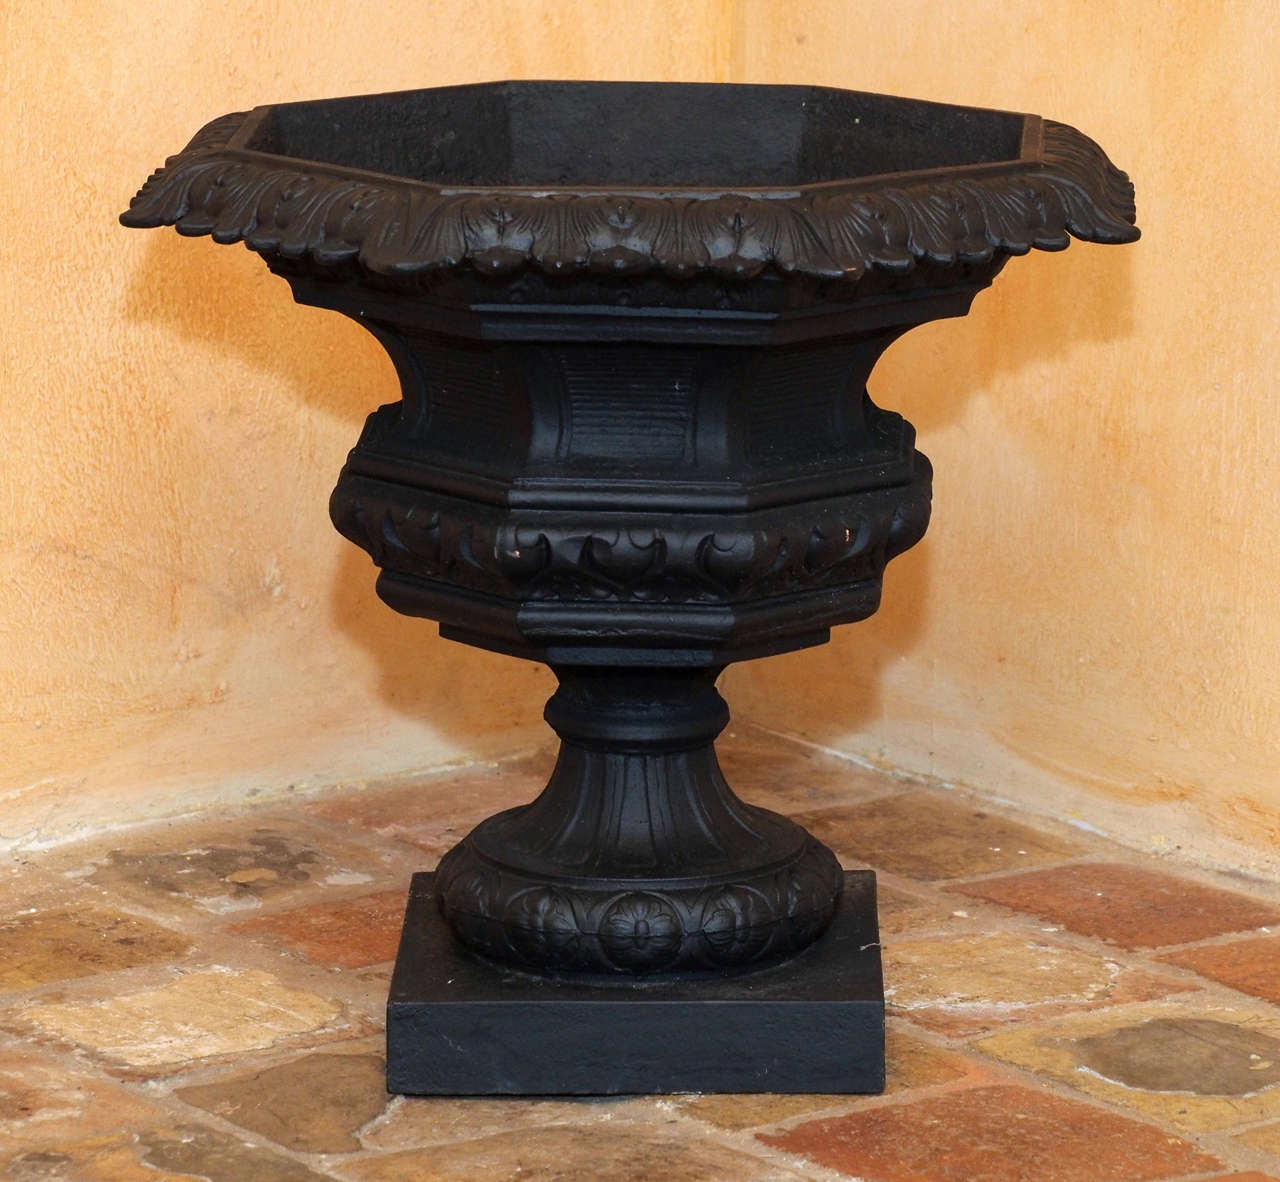 Pair of Late 19th Century Painted French Cast Iron Garden Urns with Octagon Shaped Scalloped Edges on Top.